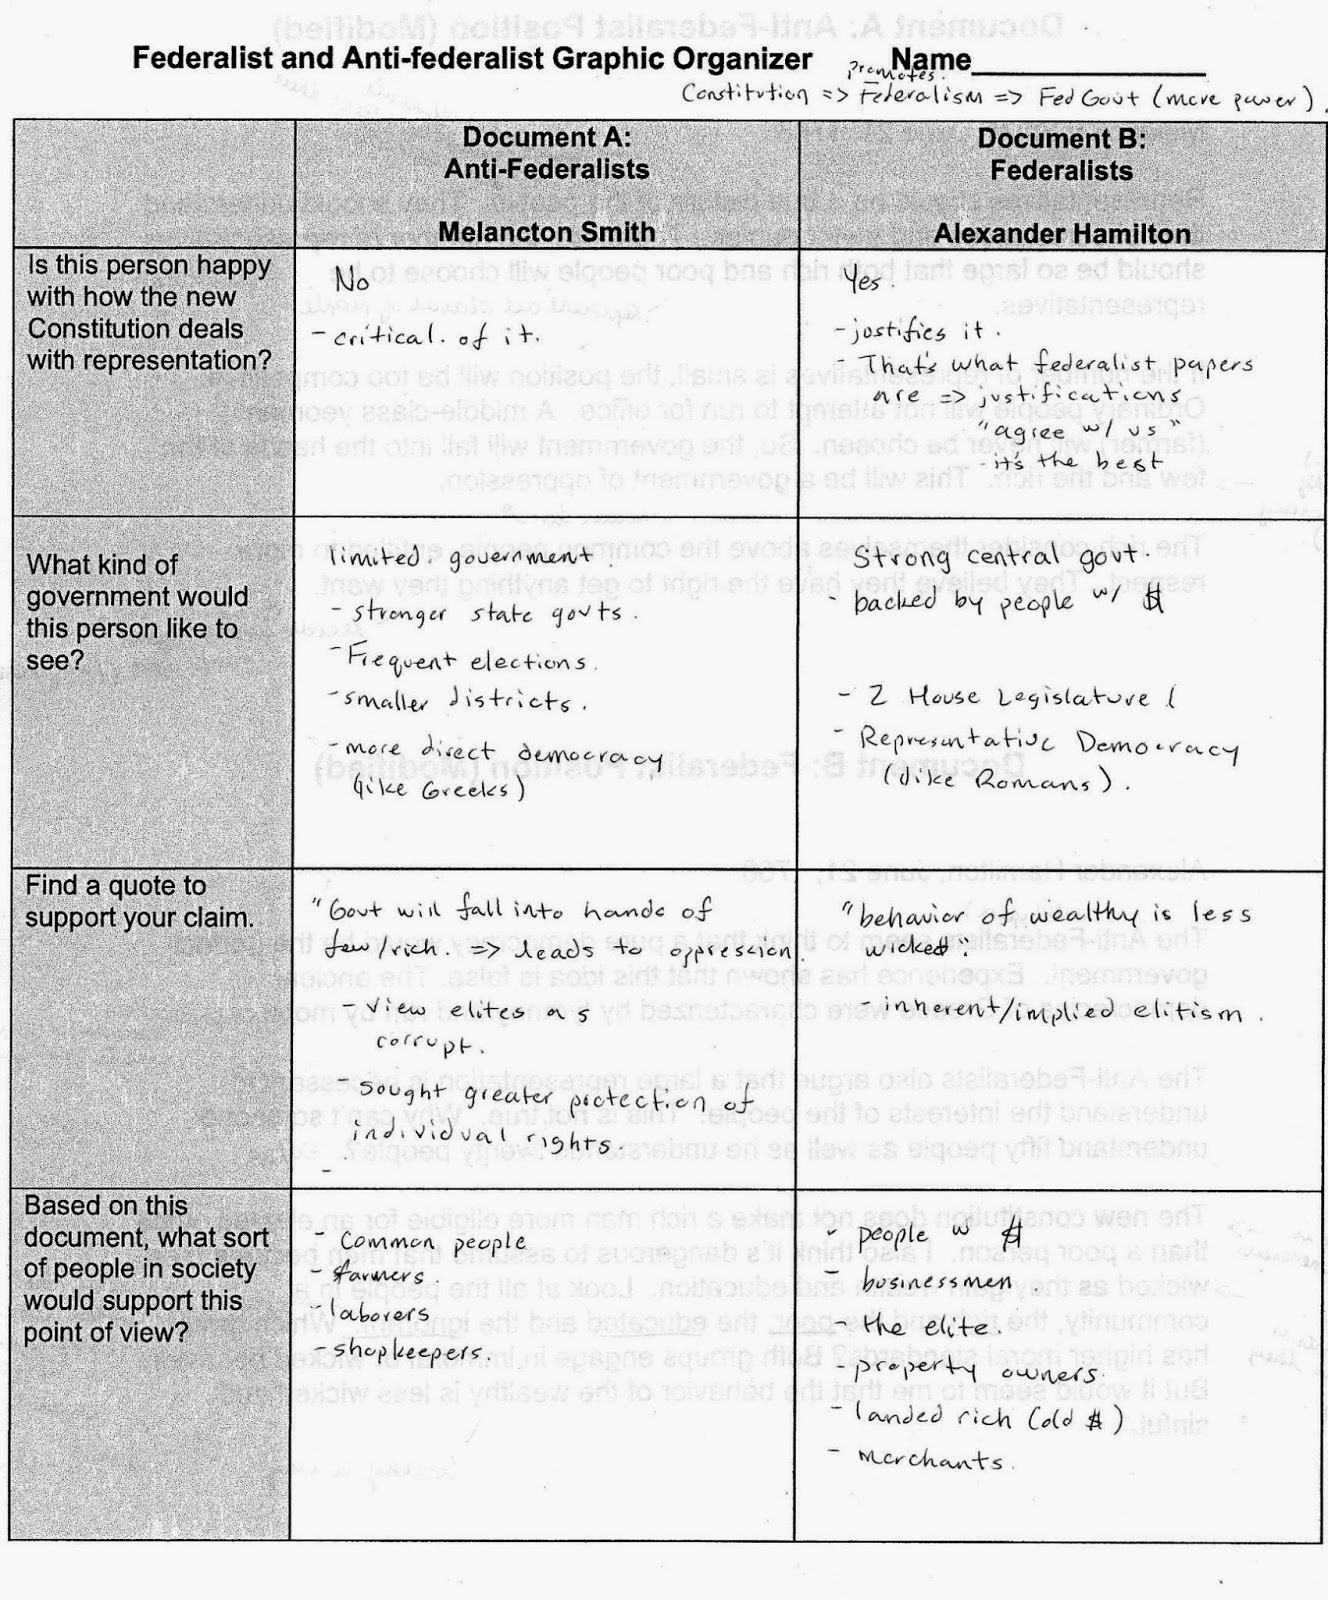 Ratifying the Constitution Worksheet Answers Federalist and Anti Federalist Worksheet Answers